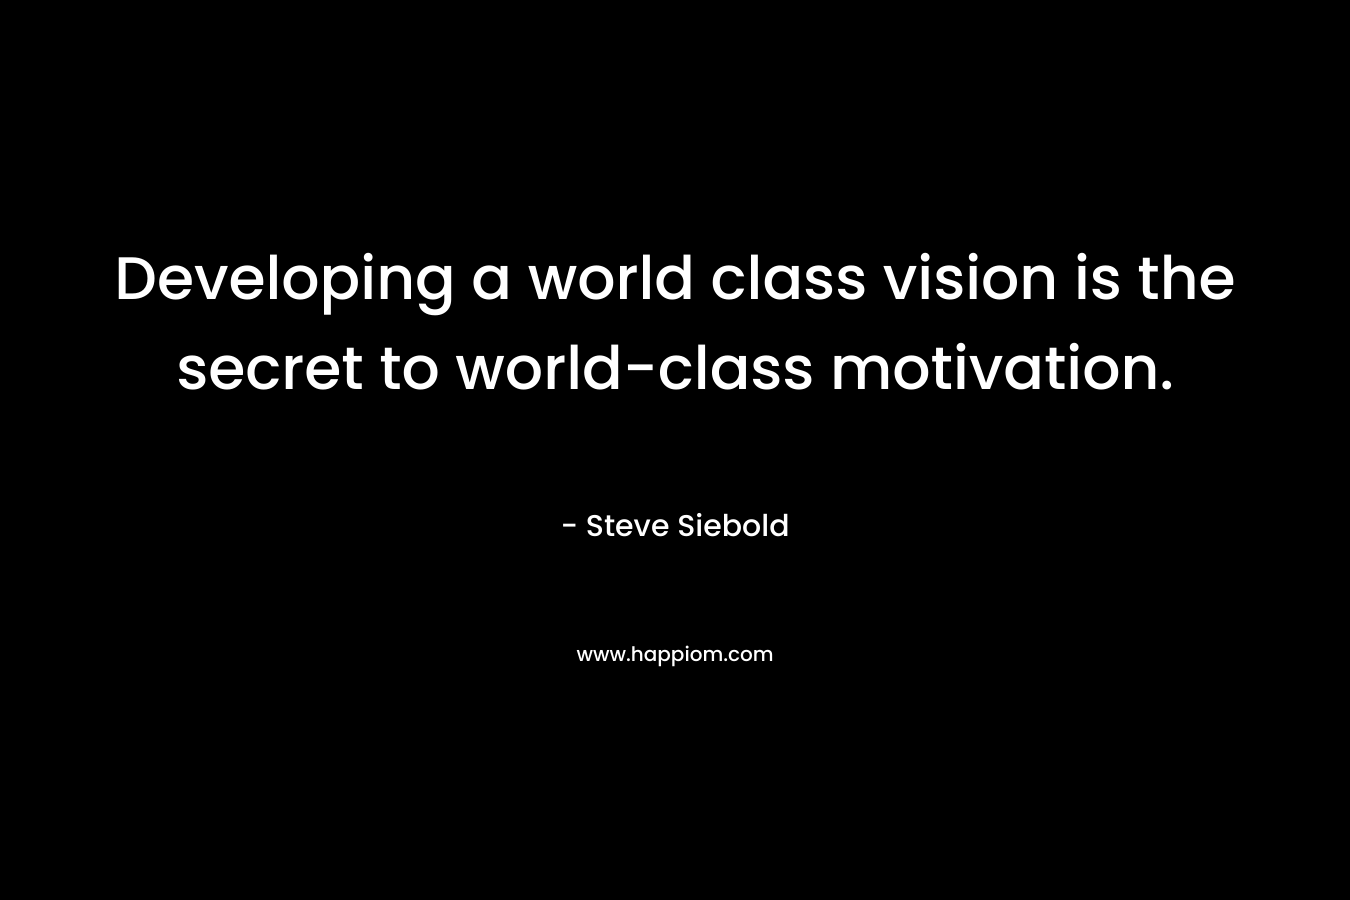 Developing a world class vision is the secret to world-class motivation.